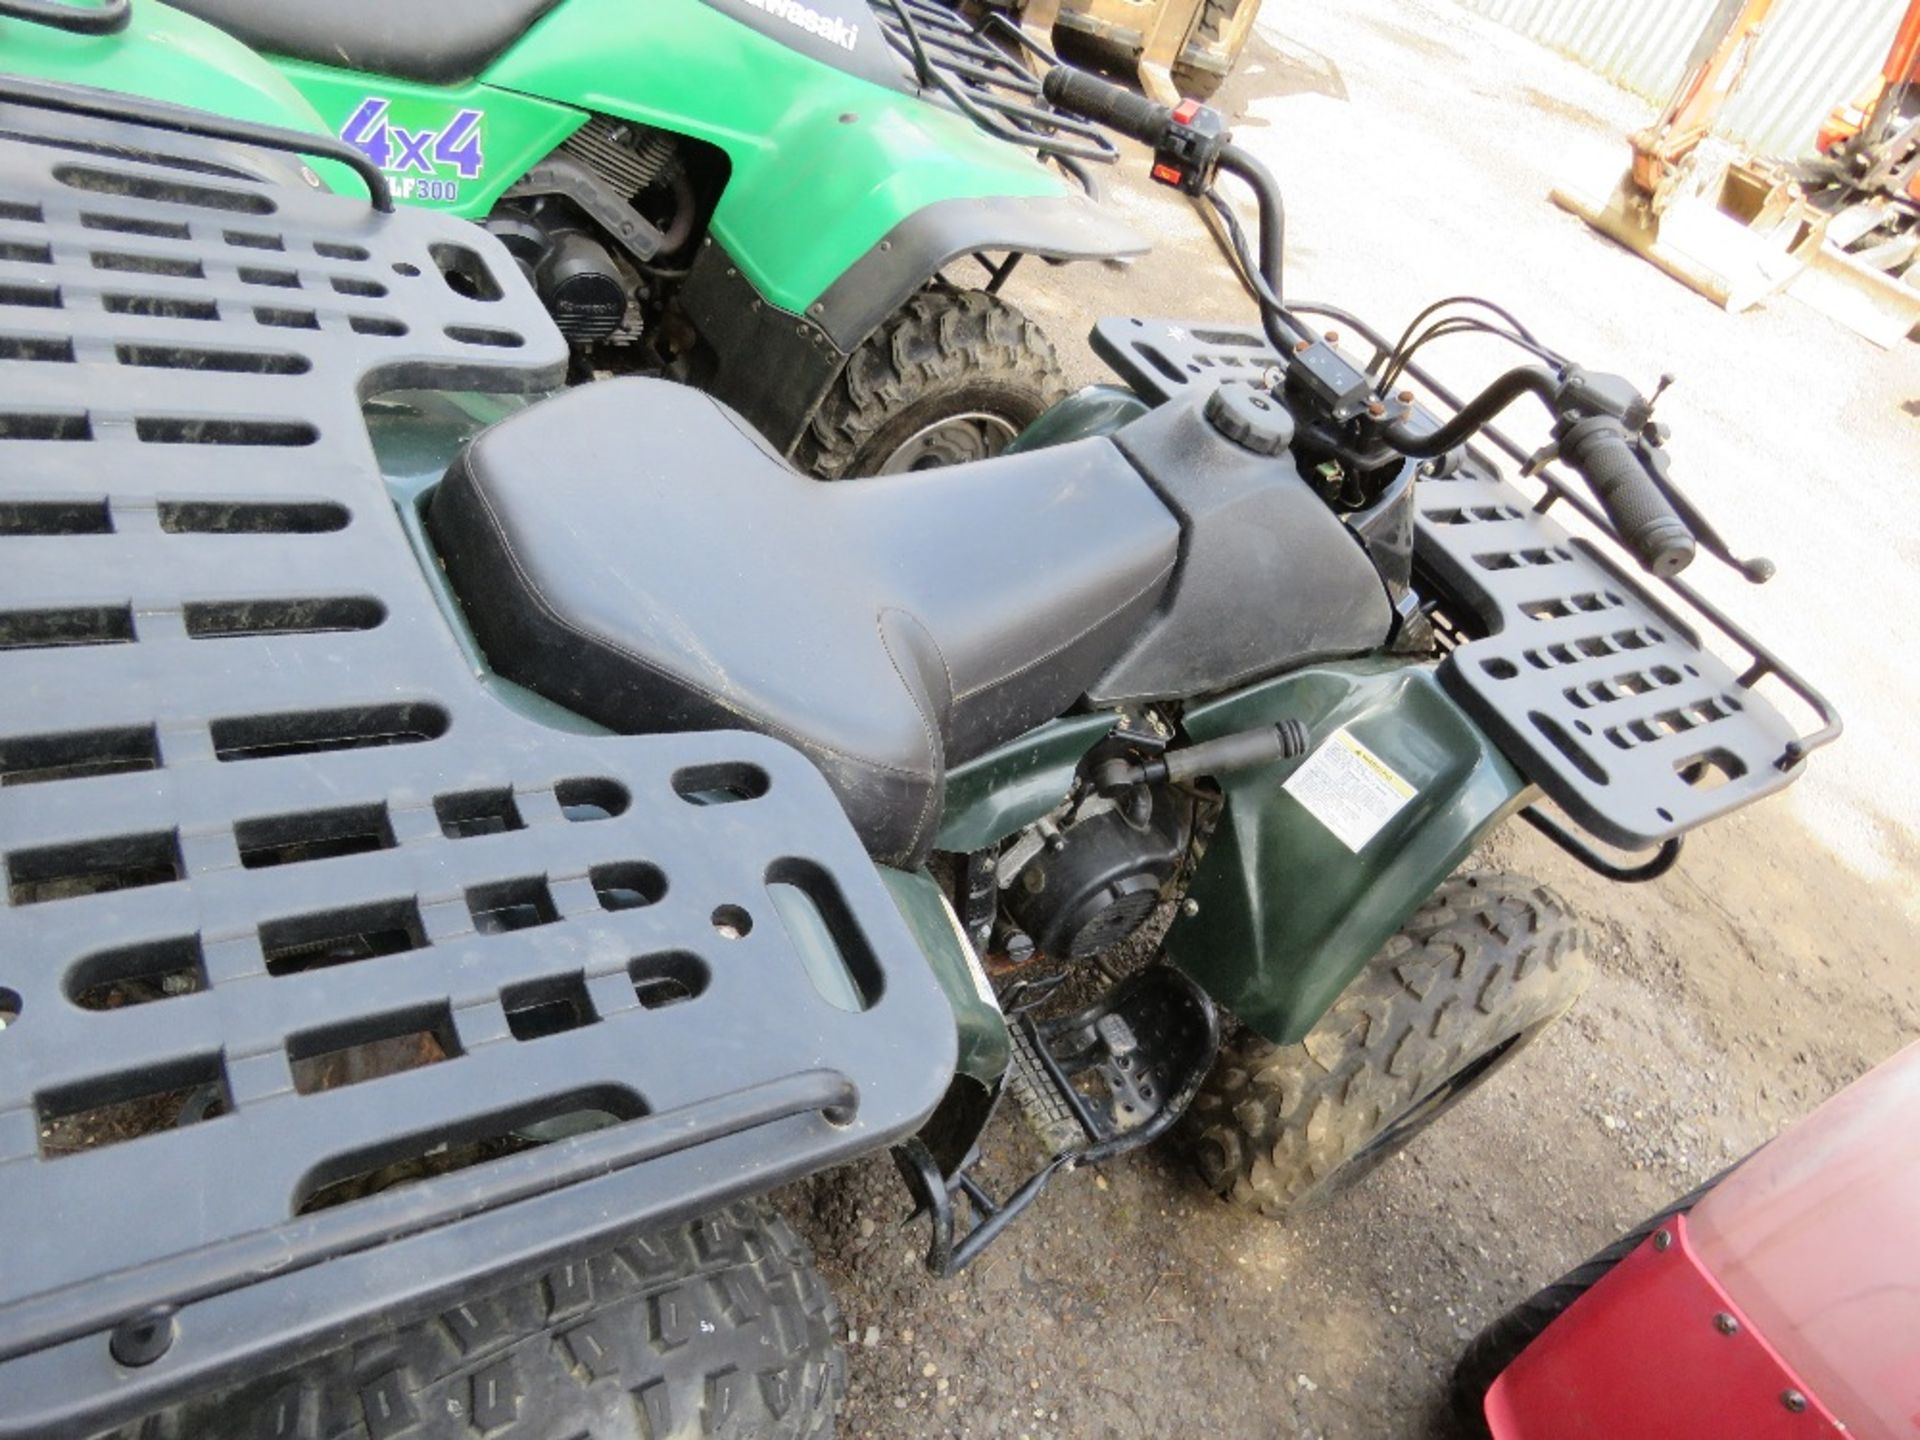 KAZUMA 2WD PETROL ENGINED QUAD BIKE, CONDITION UNKNOWN, SOLD AS NON RUNNER. - Image 6 of 6